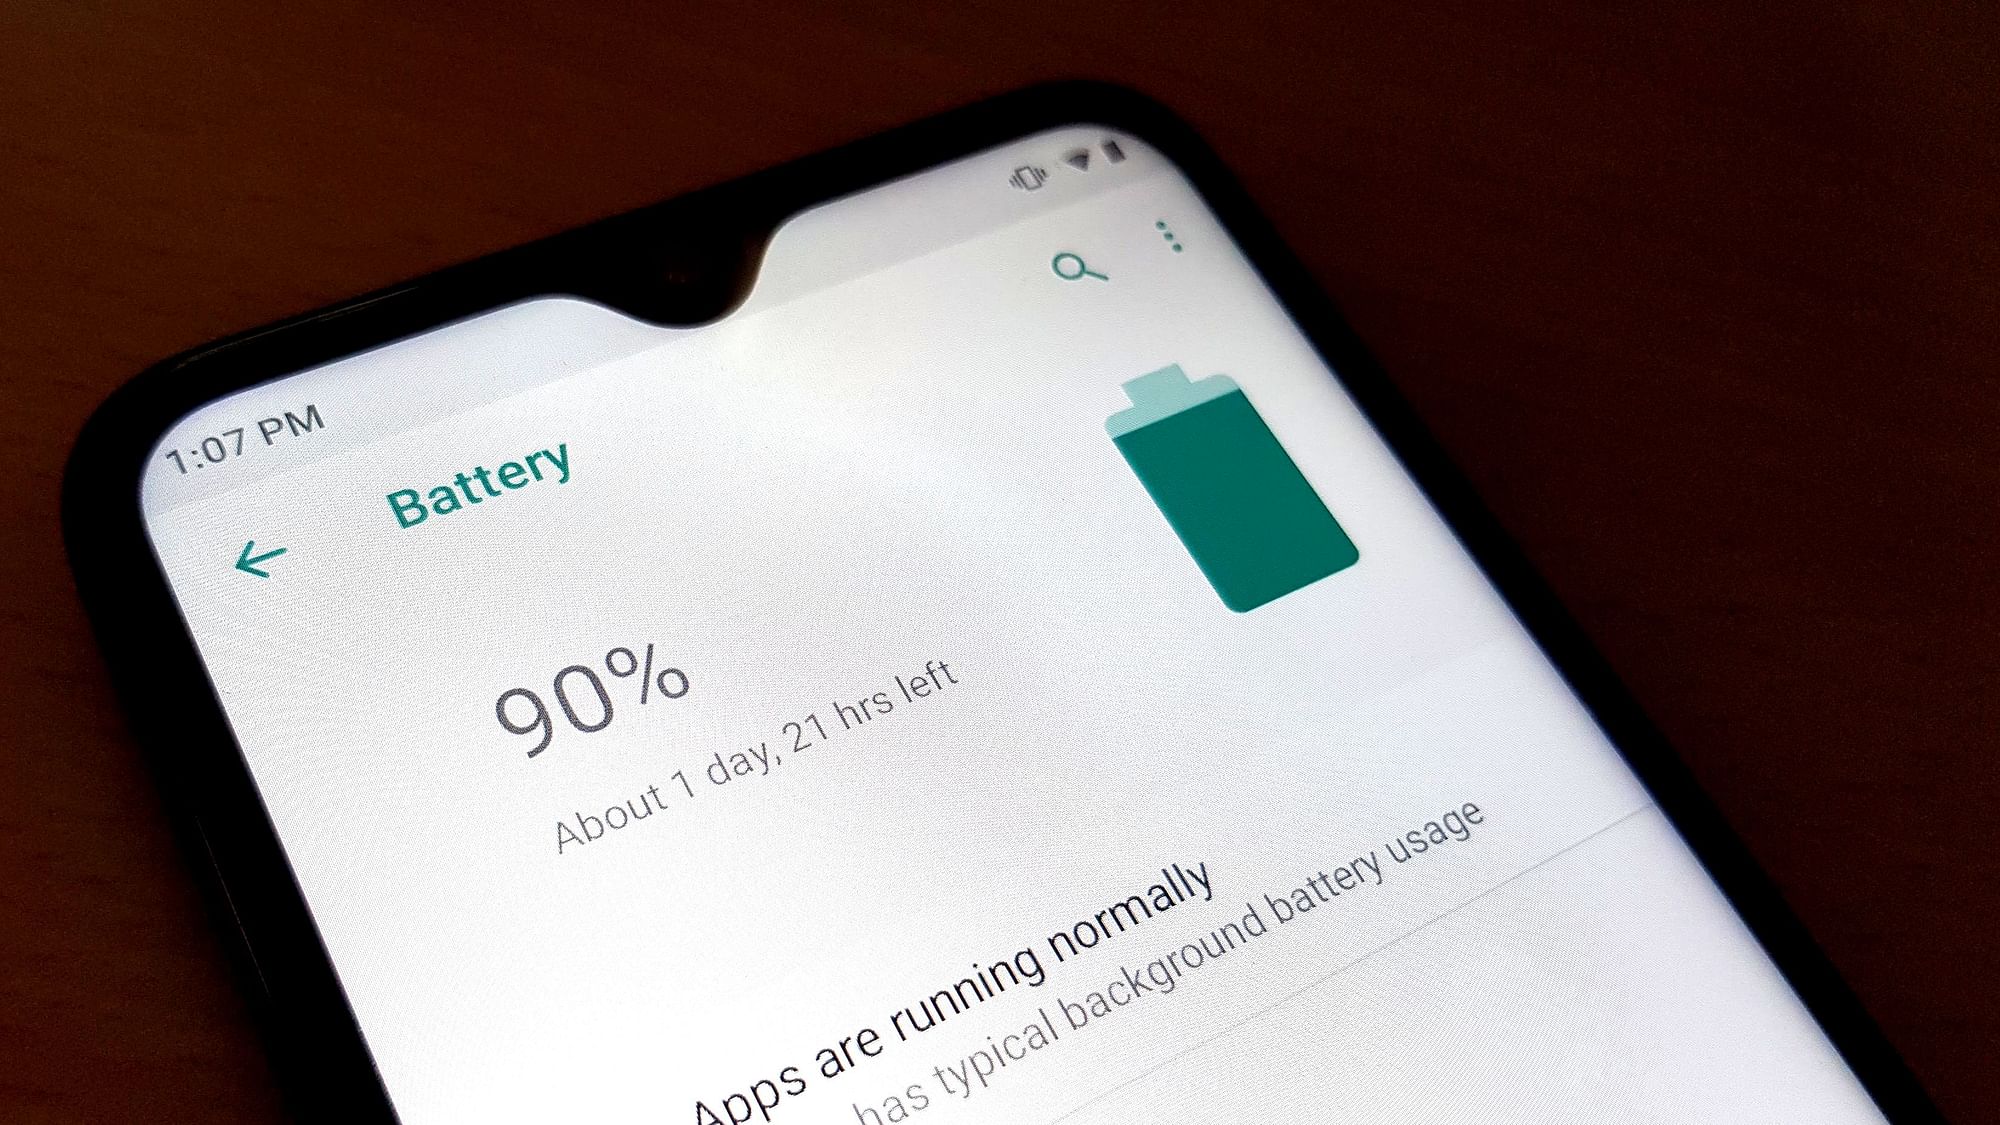 With the increase of smartphone usage, users are always concerned about the battery performance of their device.